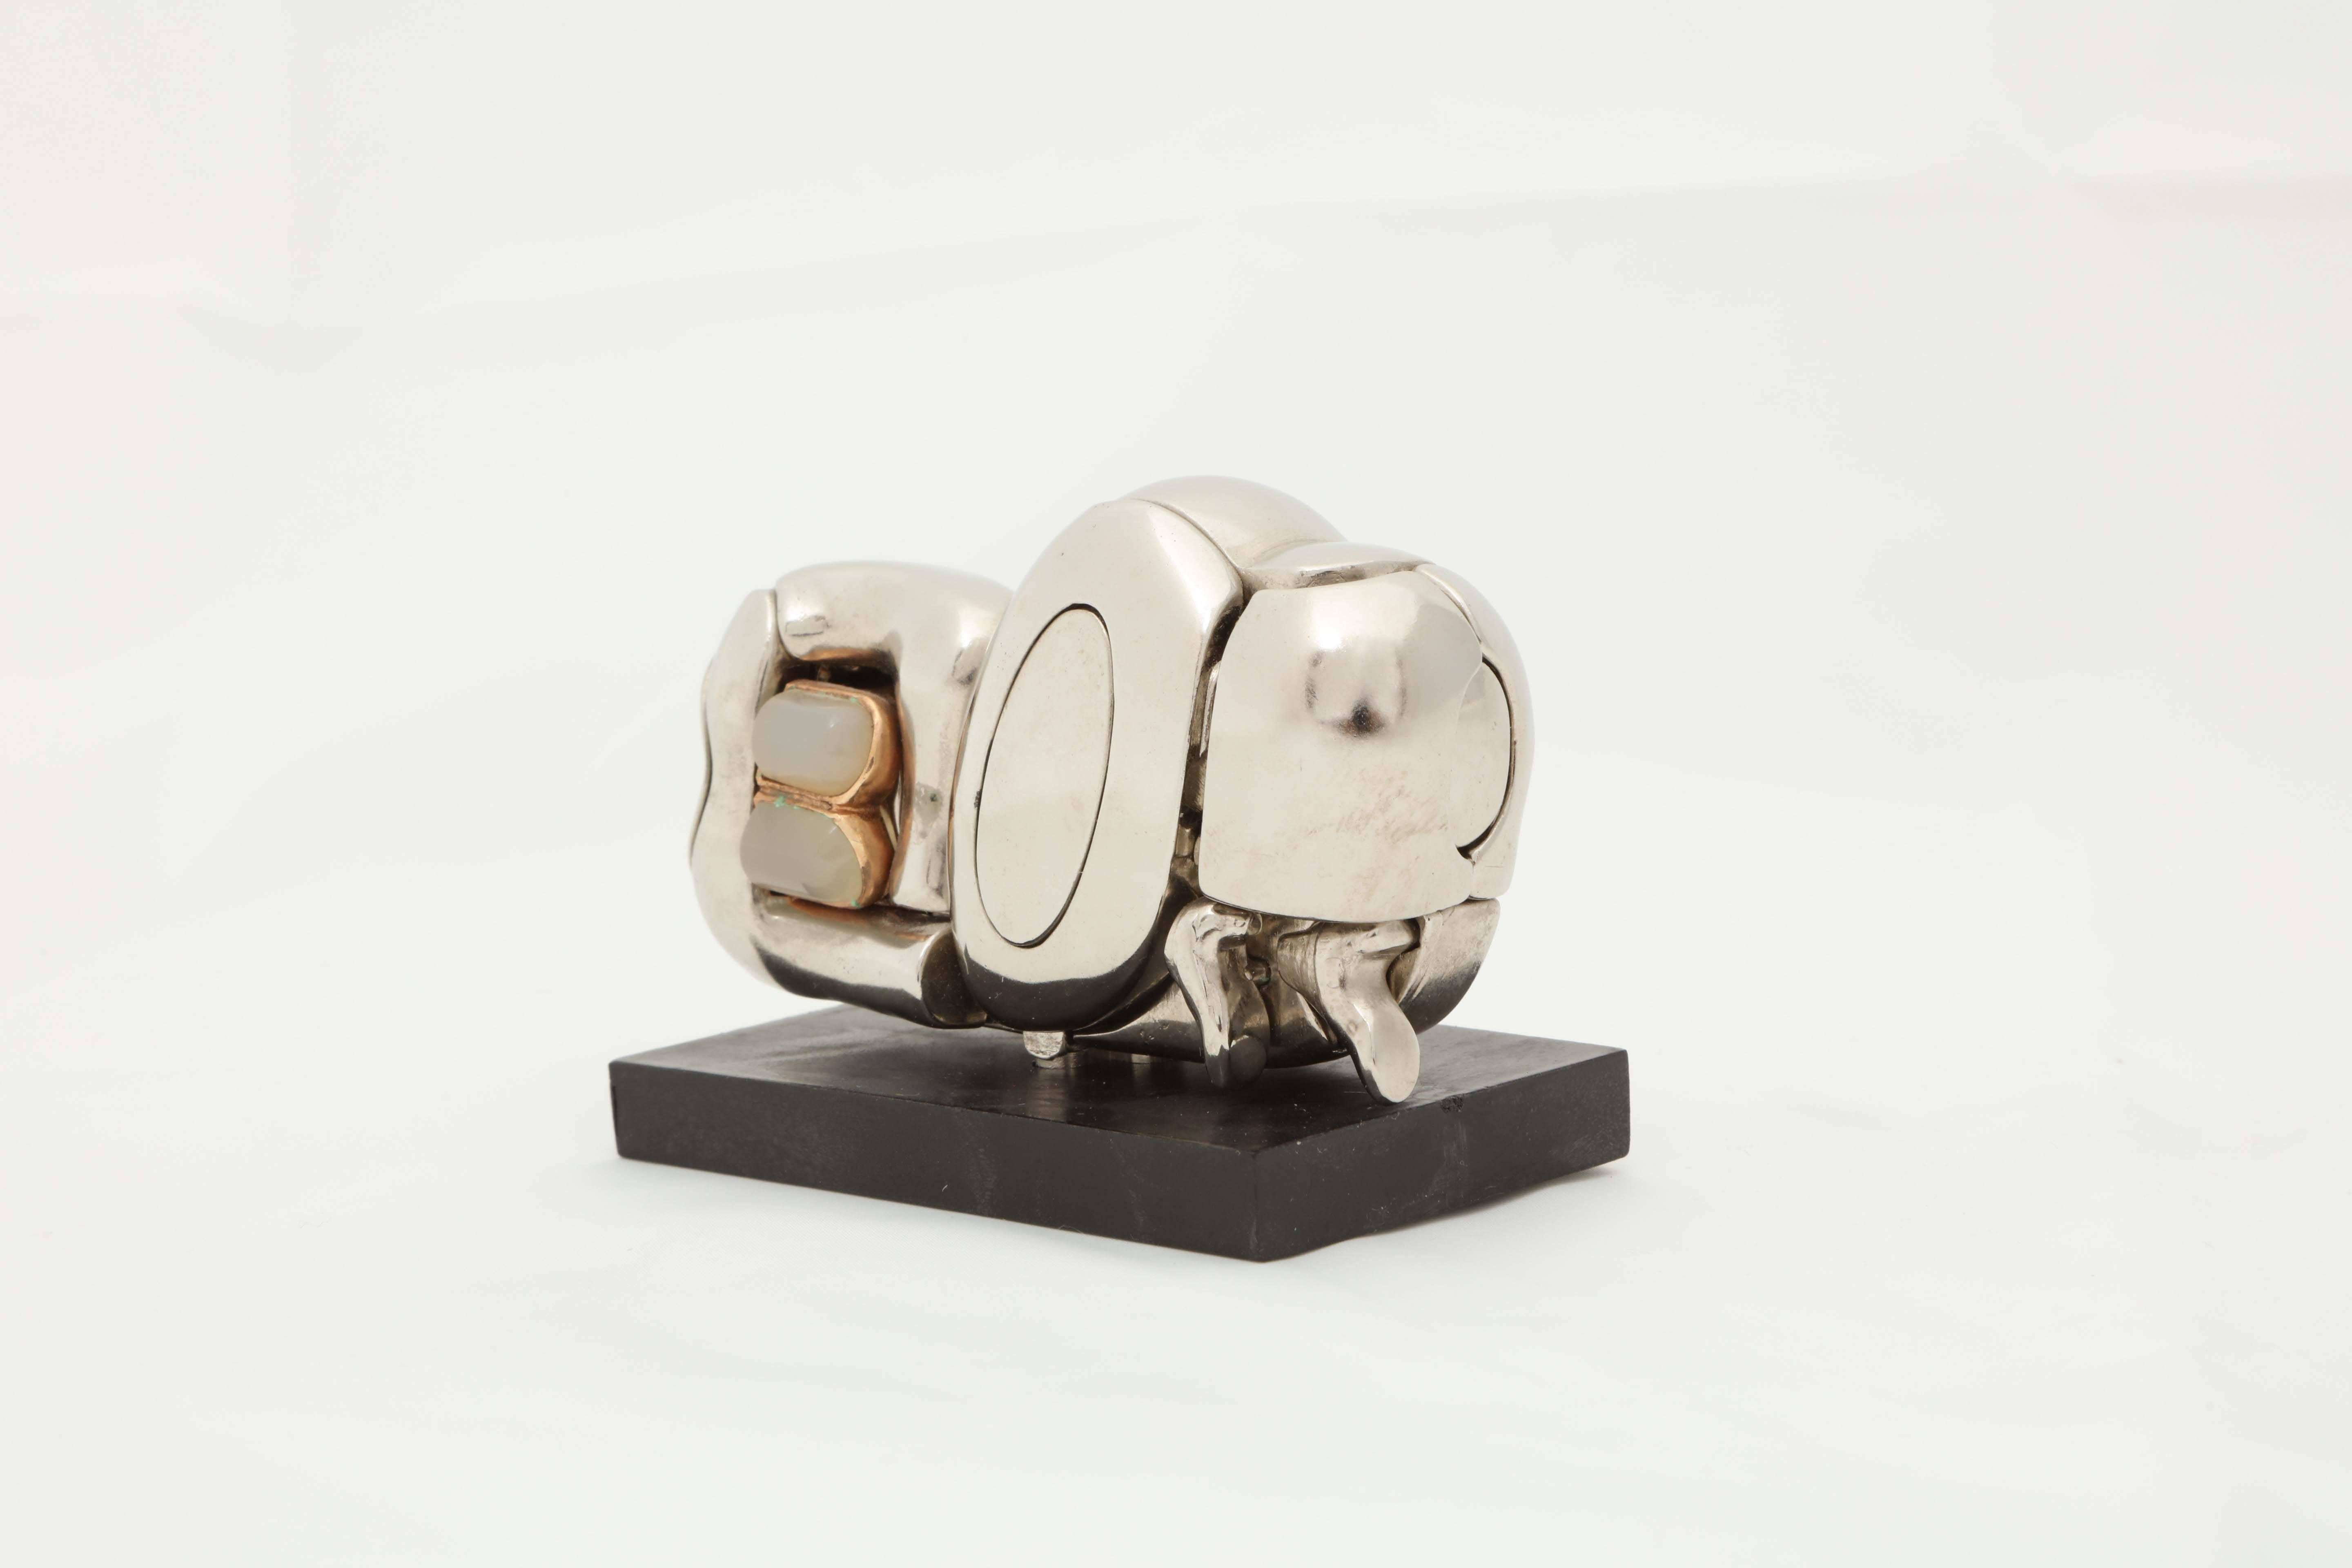 A nickel-plated puzzle sculpture consisting of 23 elements, the model is Berrocal's Homage to Paloma Picasso. The model is signed Berrocal and is 
numbered 3243. It is sold with the accompanying book also numbered 3243.
It's in mint condition.